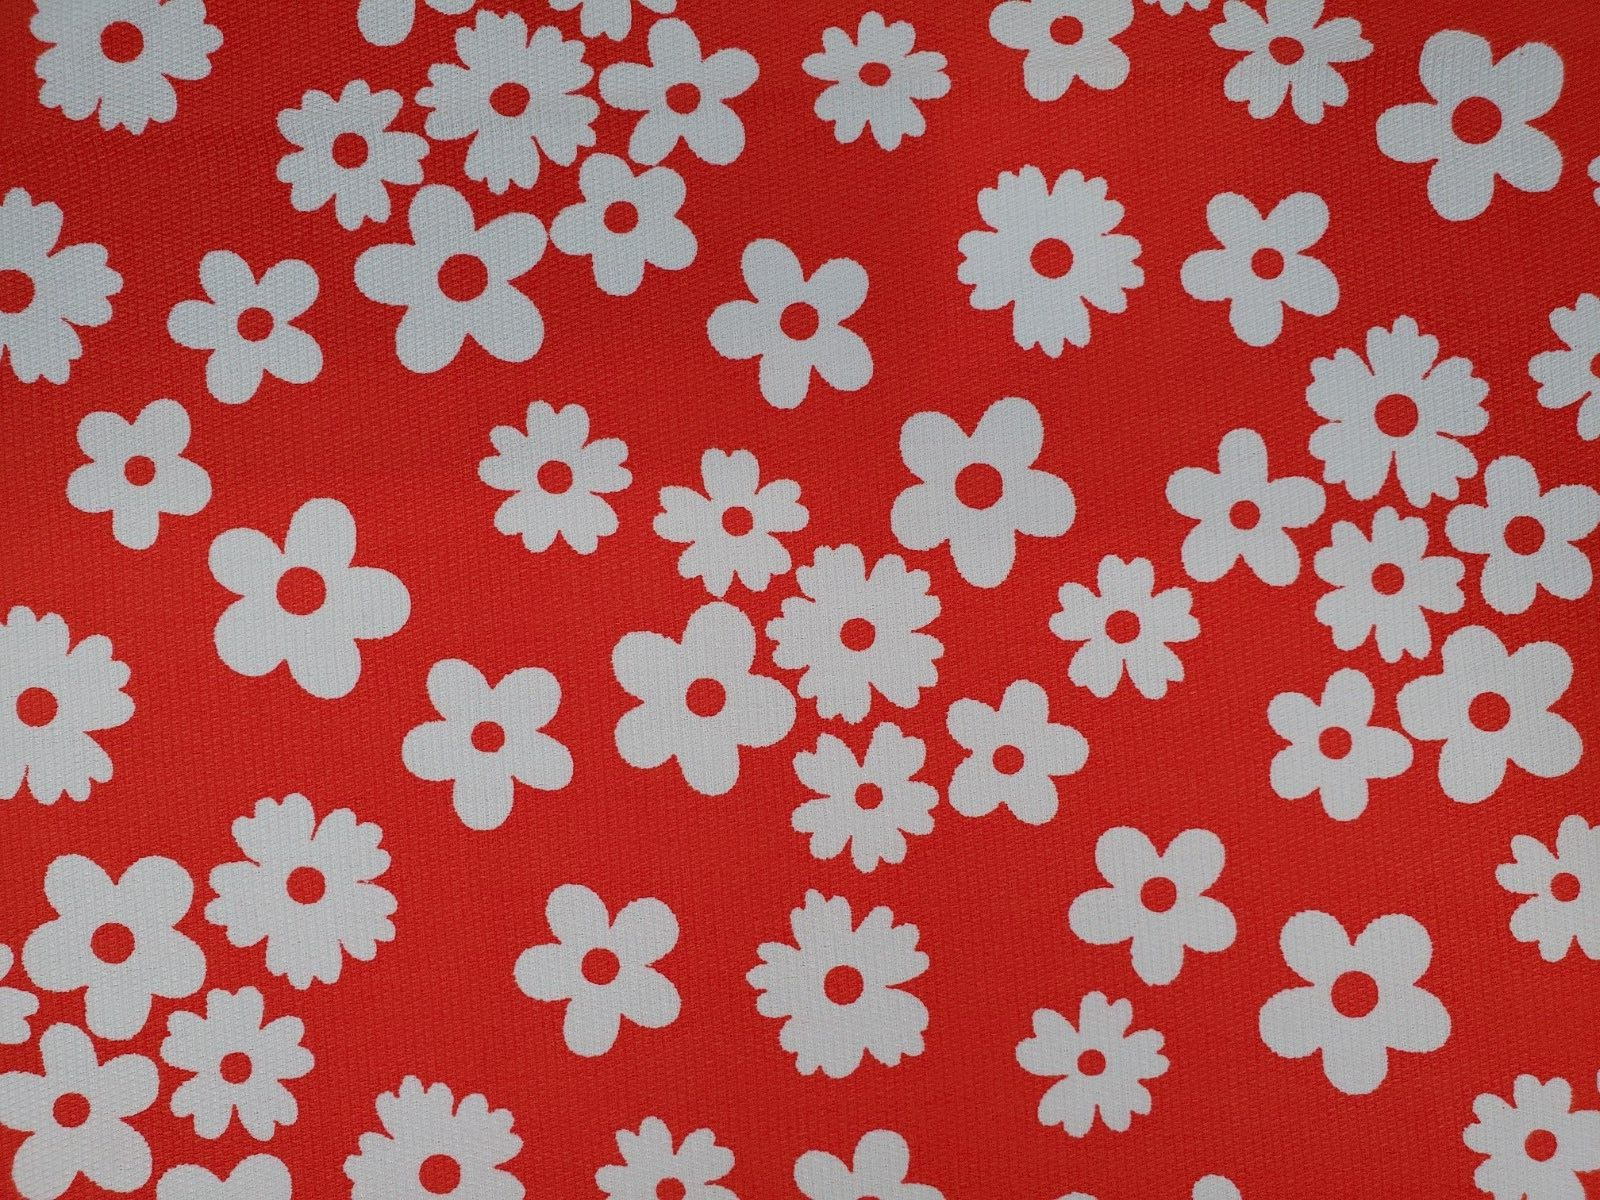 Vintage 60s 70s Flower Power Fabric Red Floral Daisy 106 x 44